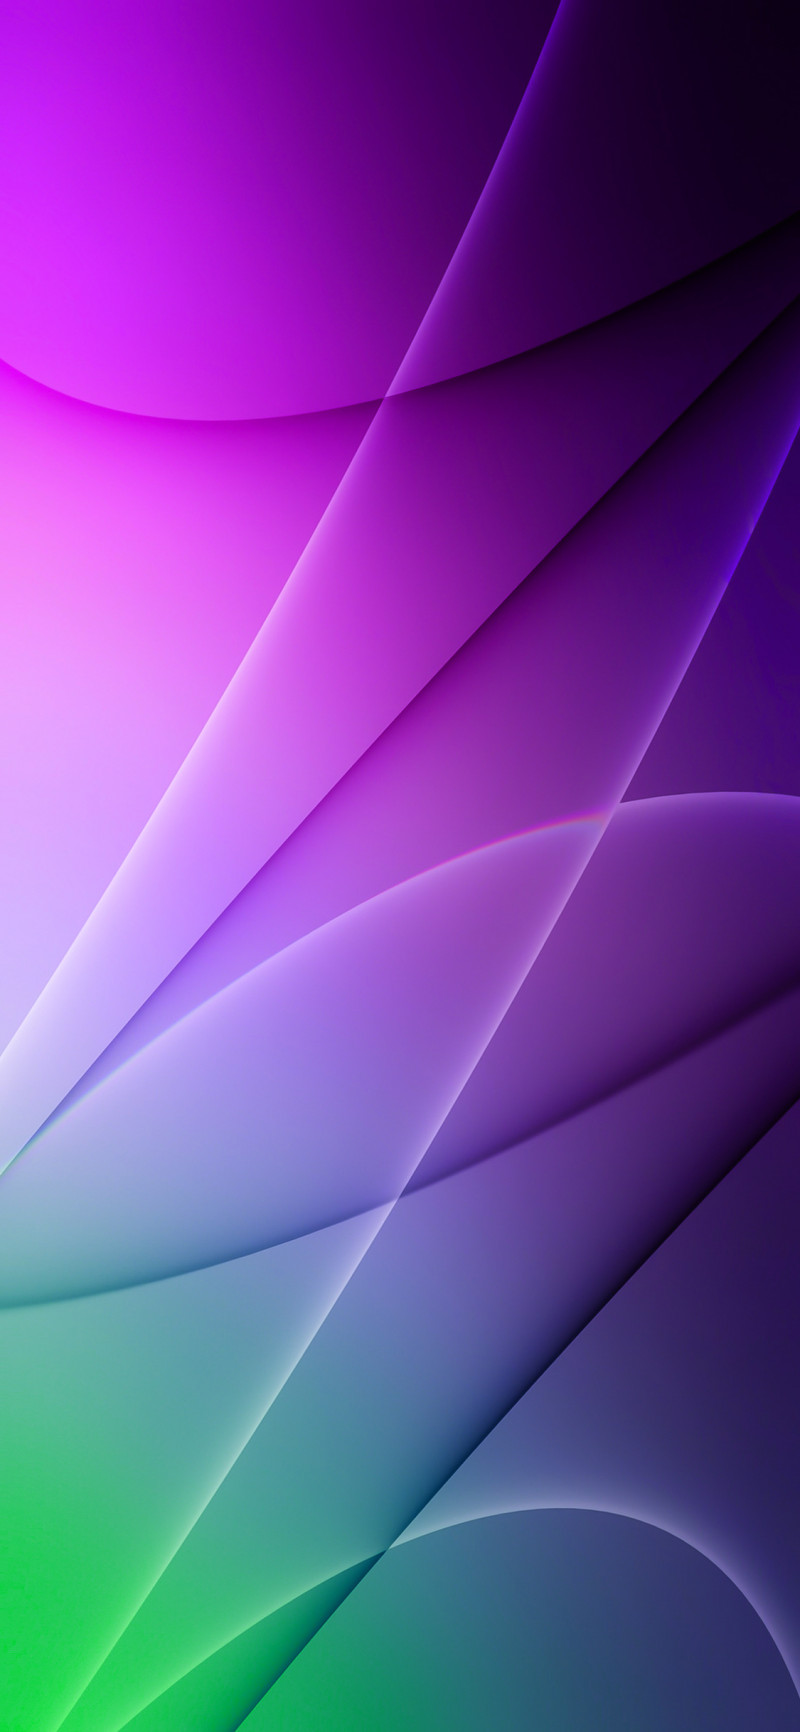 Rainbow colours, Concept iPhone Wallpaper. WallpaperNoon